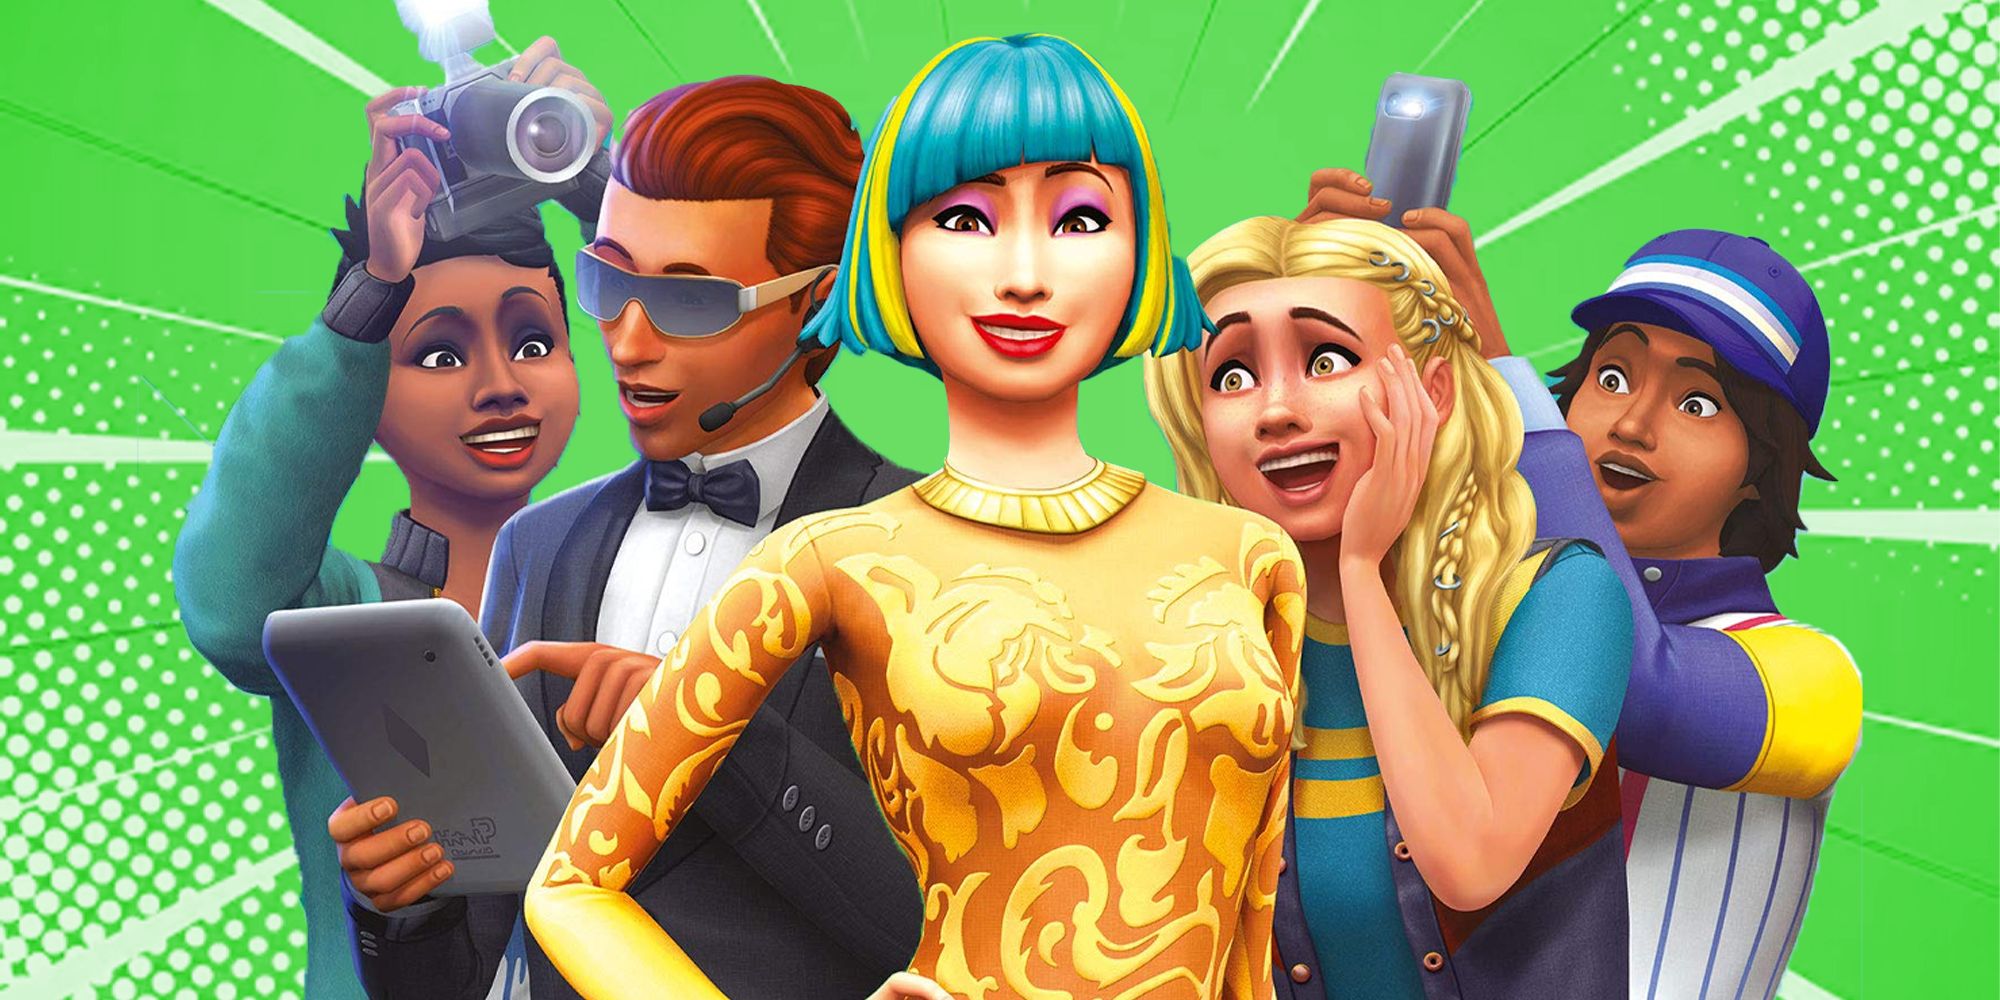 Sims 4 player discovers cool “Become Famous” mechanic after 1,000 hours of play